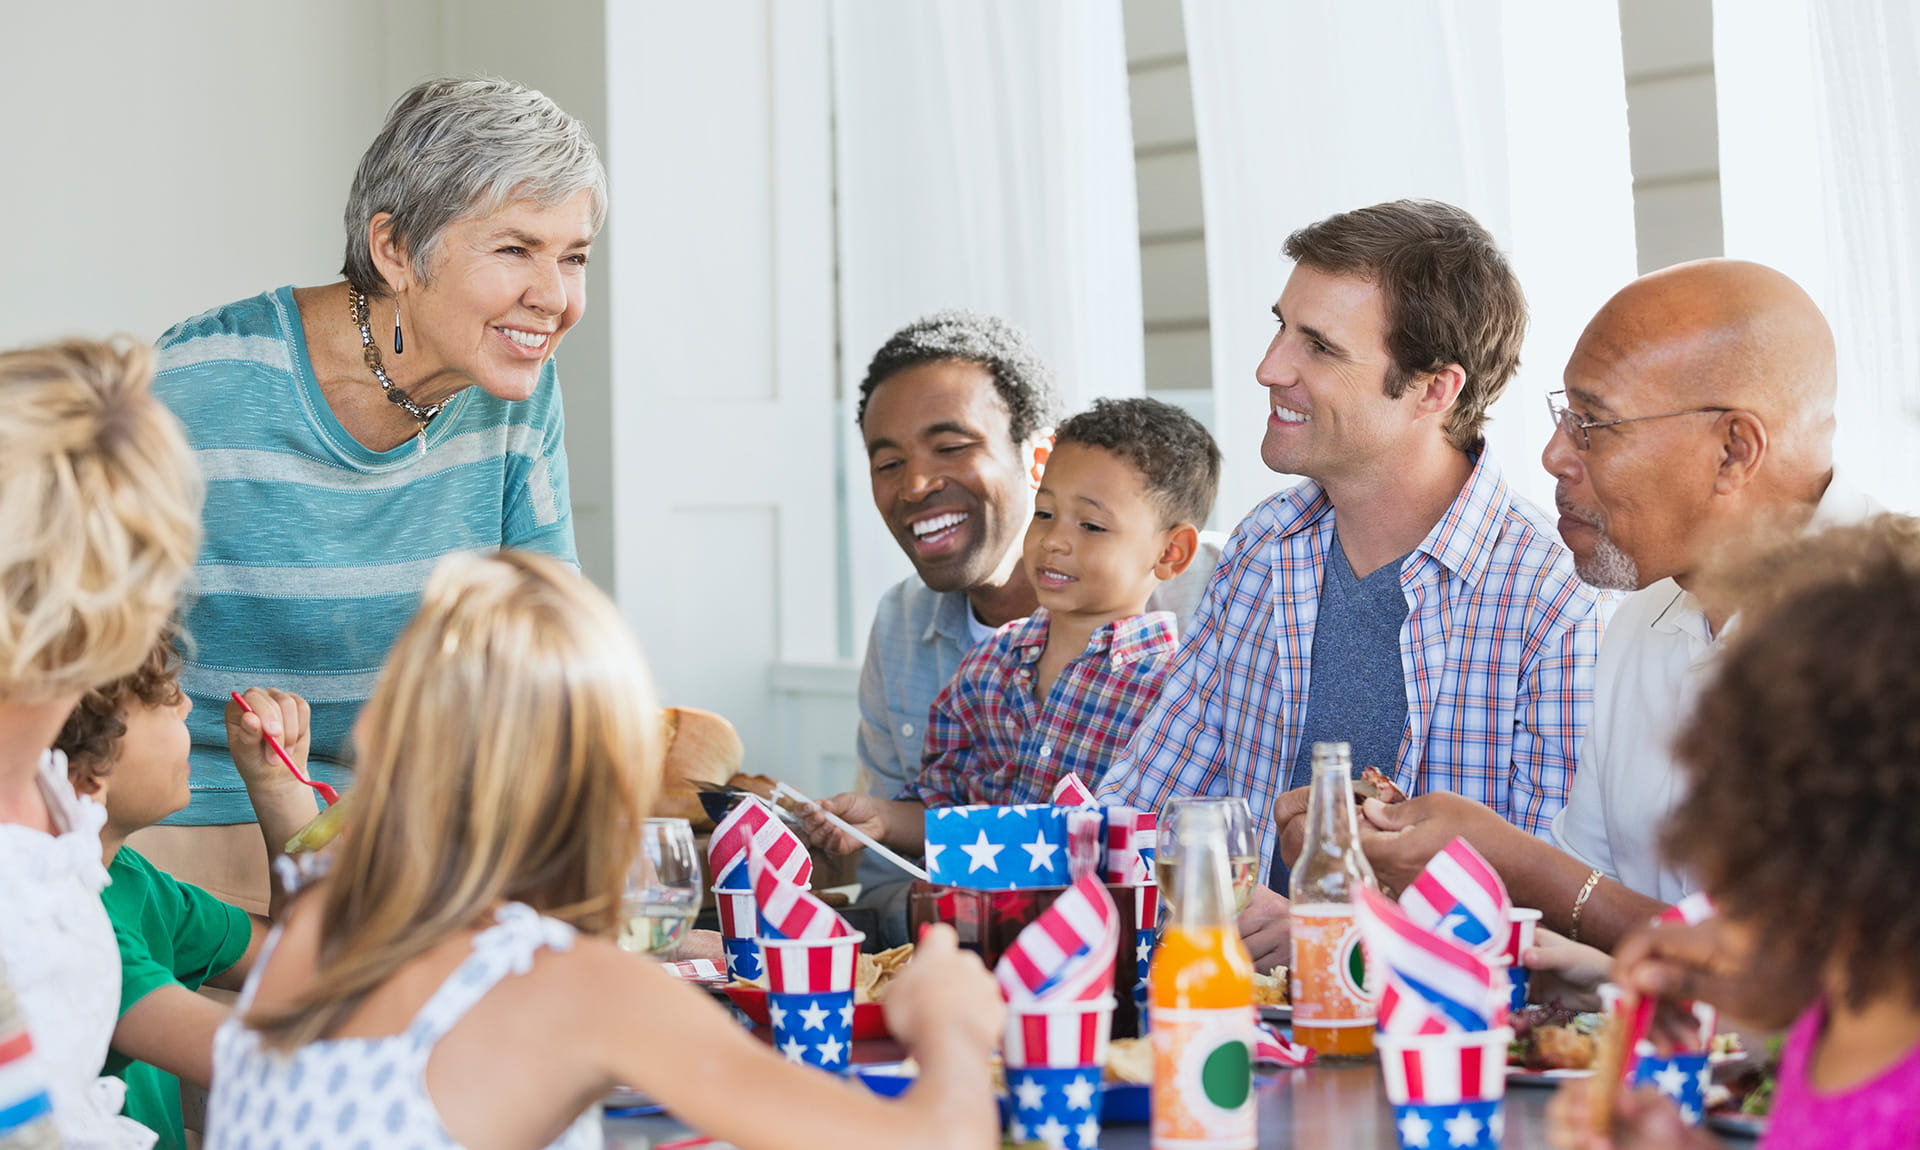 A family celebrating fourth of july